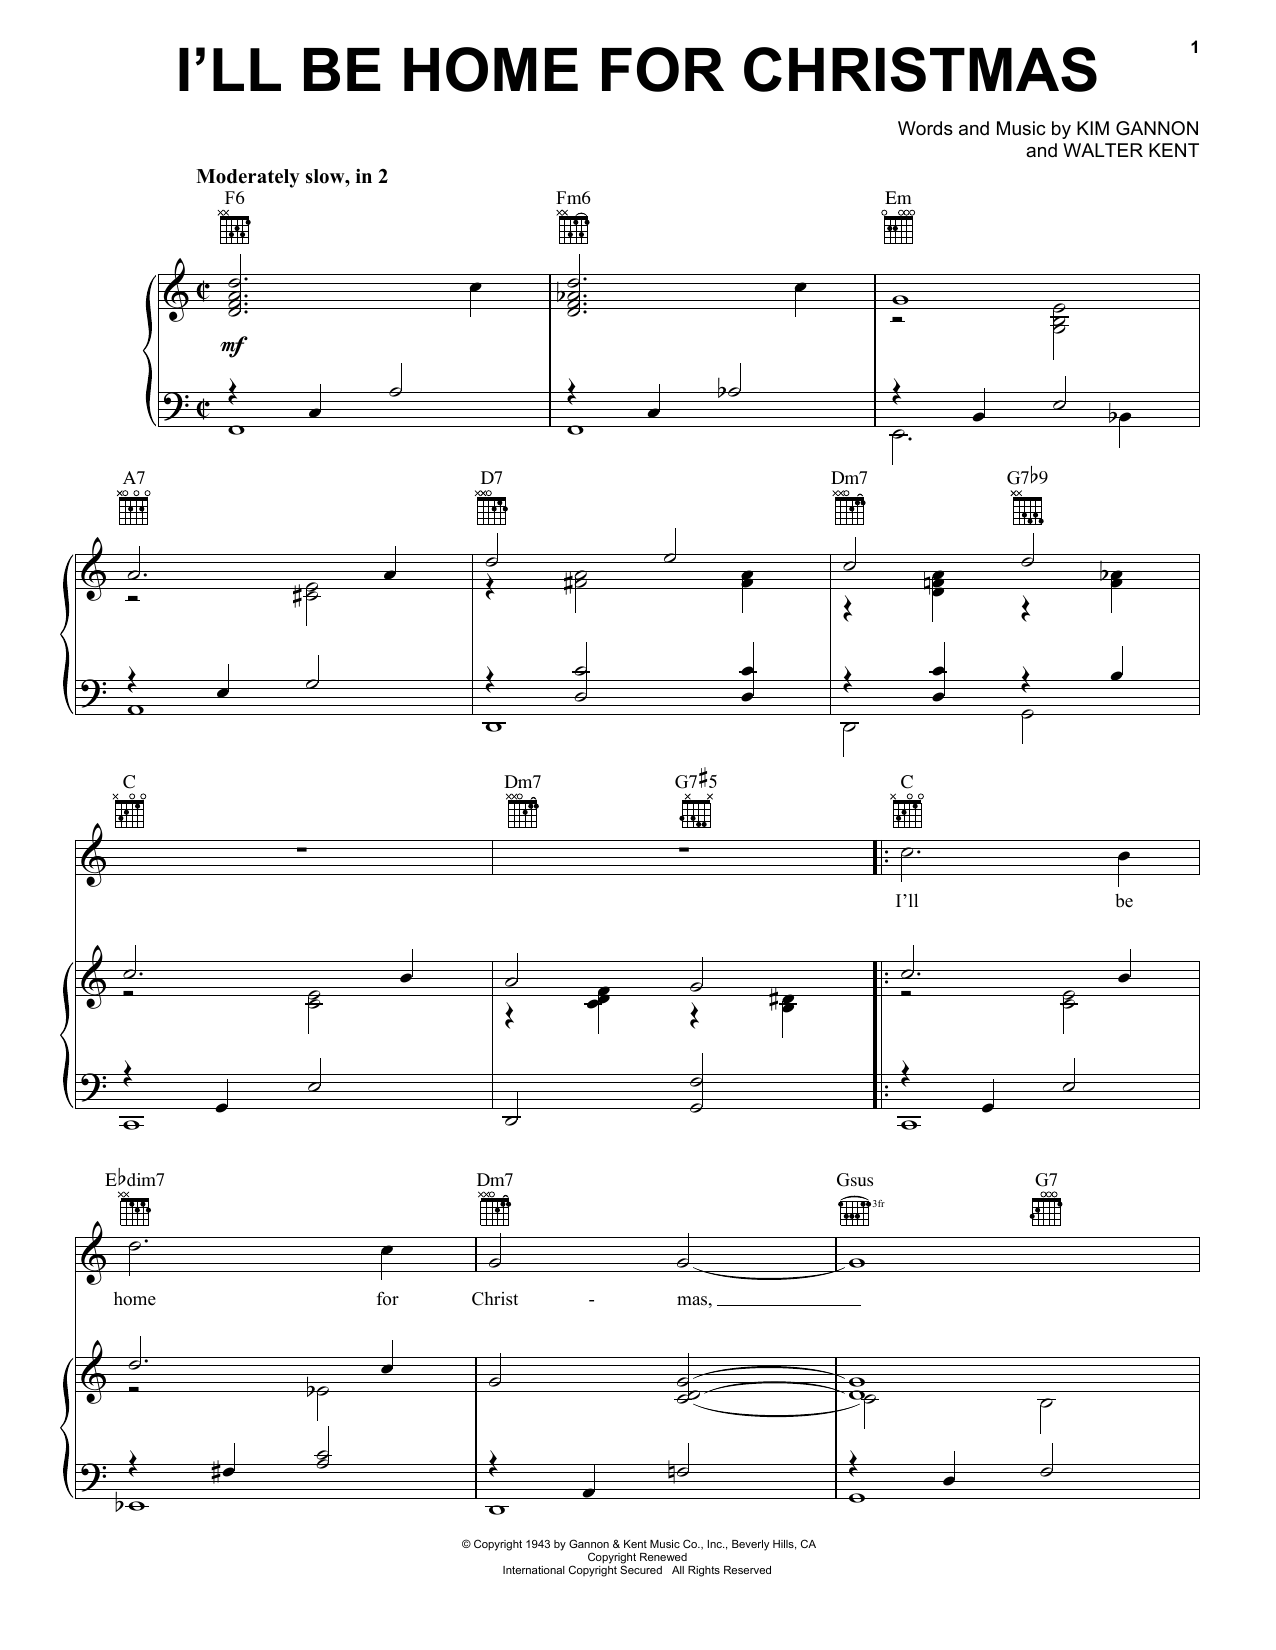 Download Frank Sinatra I'll Be Home For Christmas Sheet Music